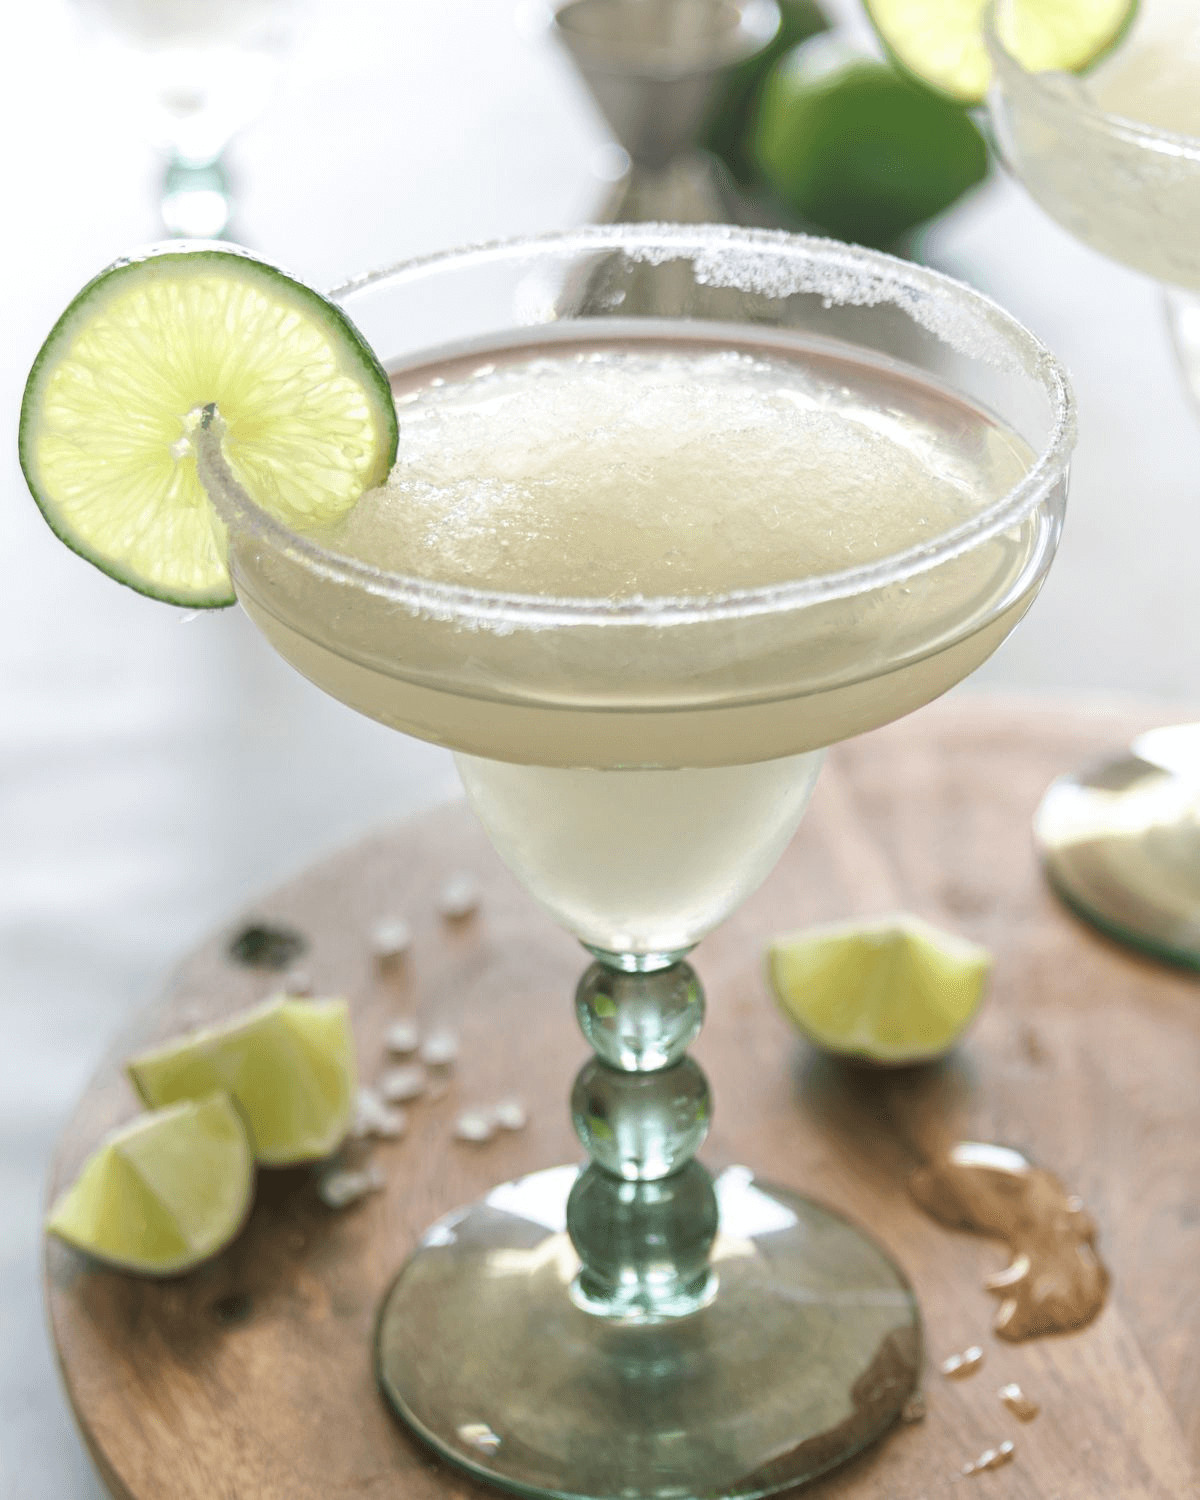 A skinny margarita with a slice of lime.